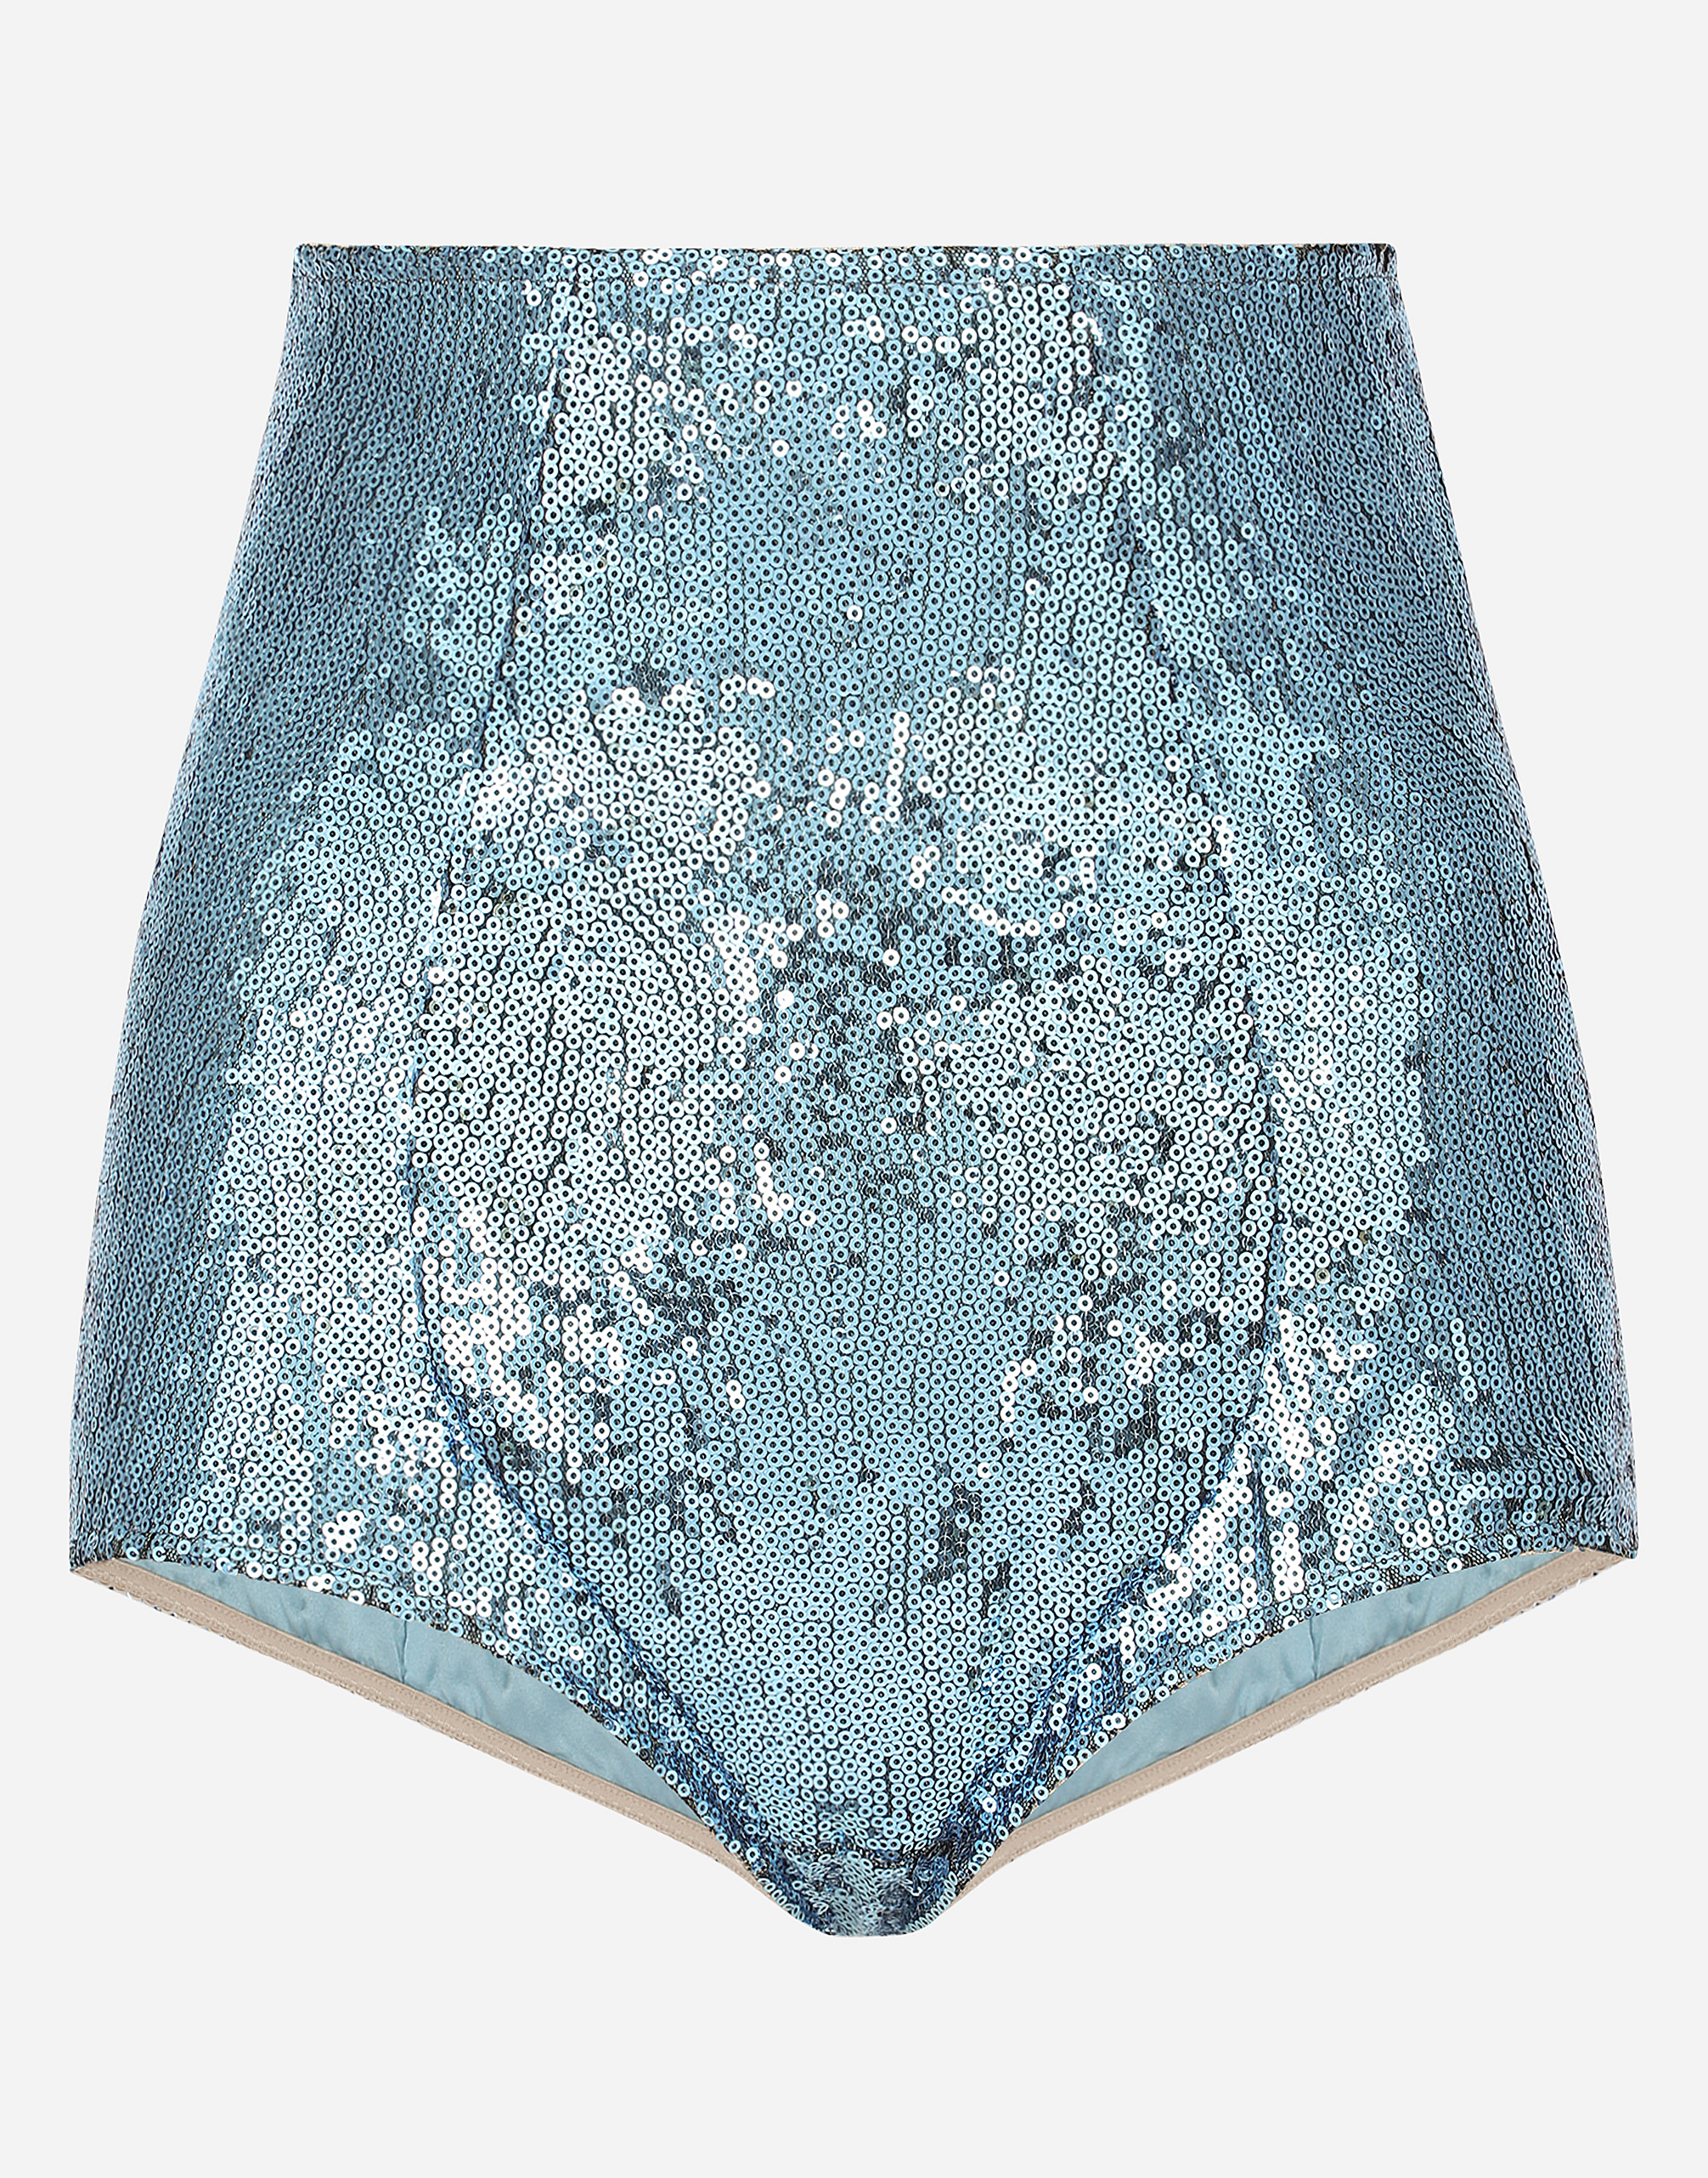 Sequined high-waisted panties in Azure